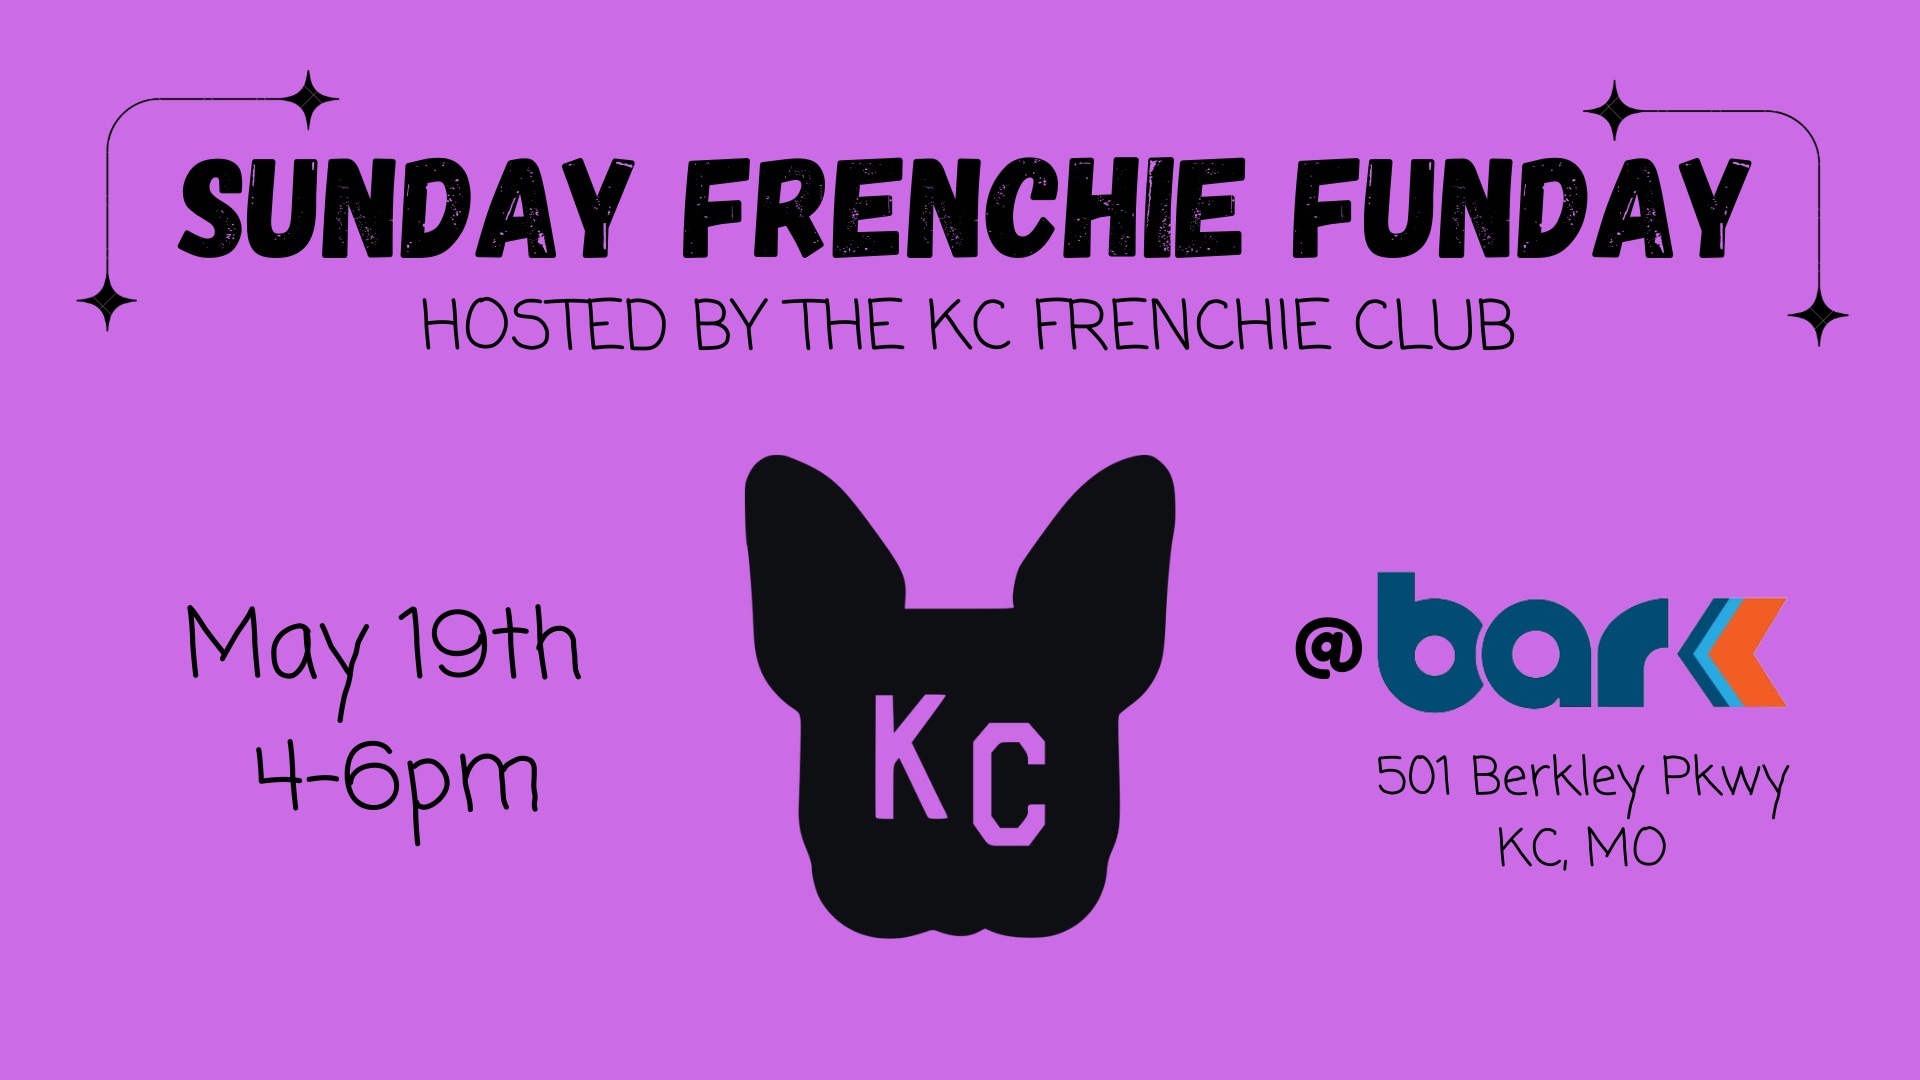 Sunday Frenchie Funday Hosted by the KC Frenchie Club May 19th from 4 to 6 pm at Bar K 501 Berkley Pkwy kc, mo